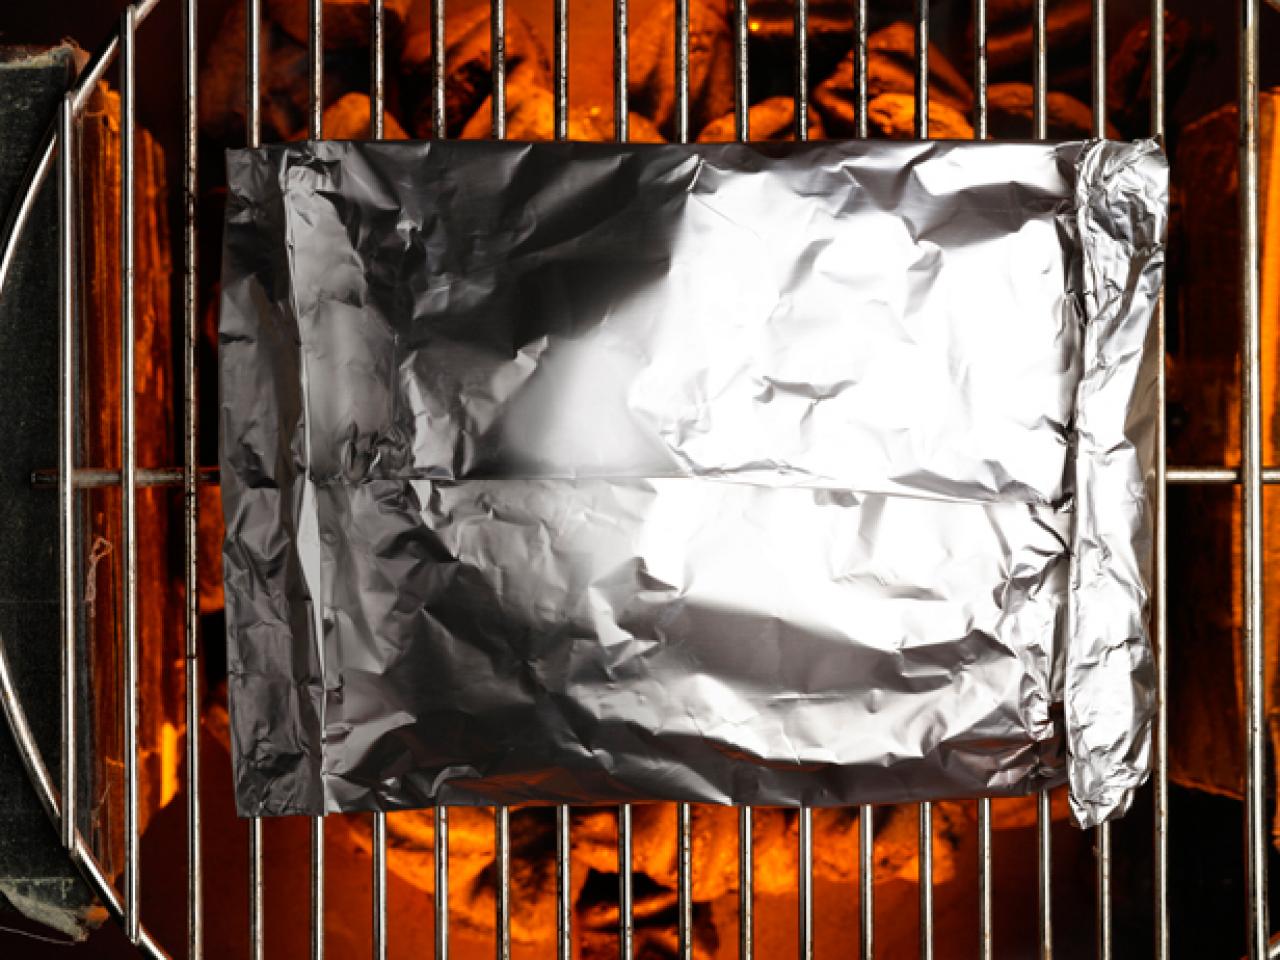 How to Make and Use a Foil Packet to Cook on Your Grill